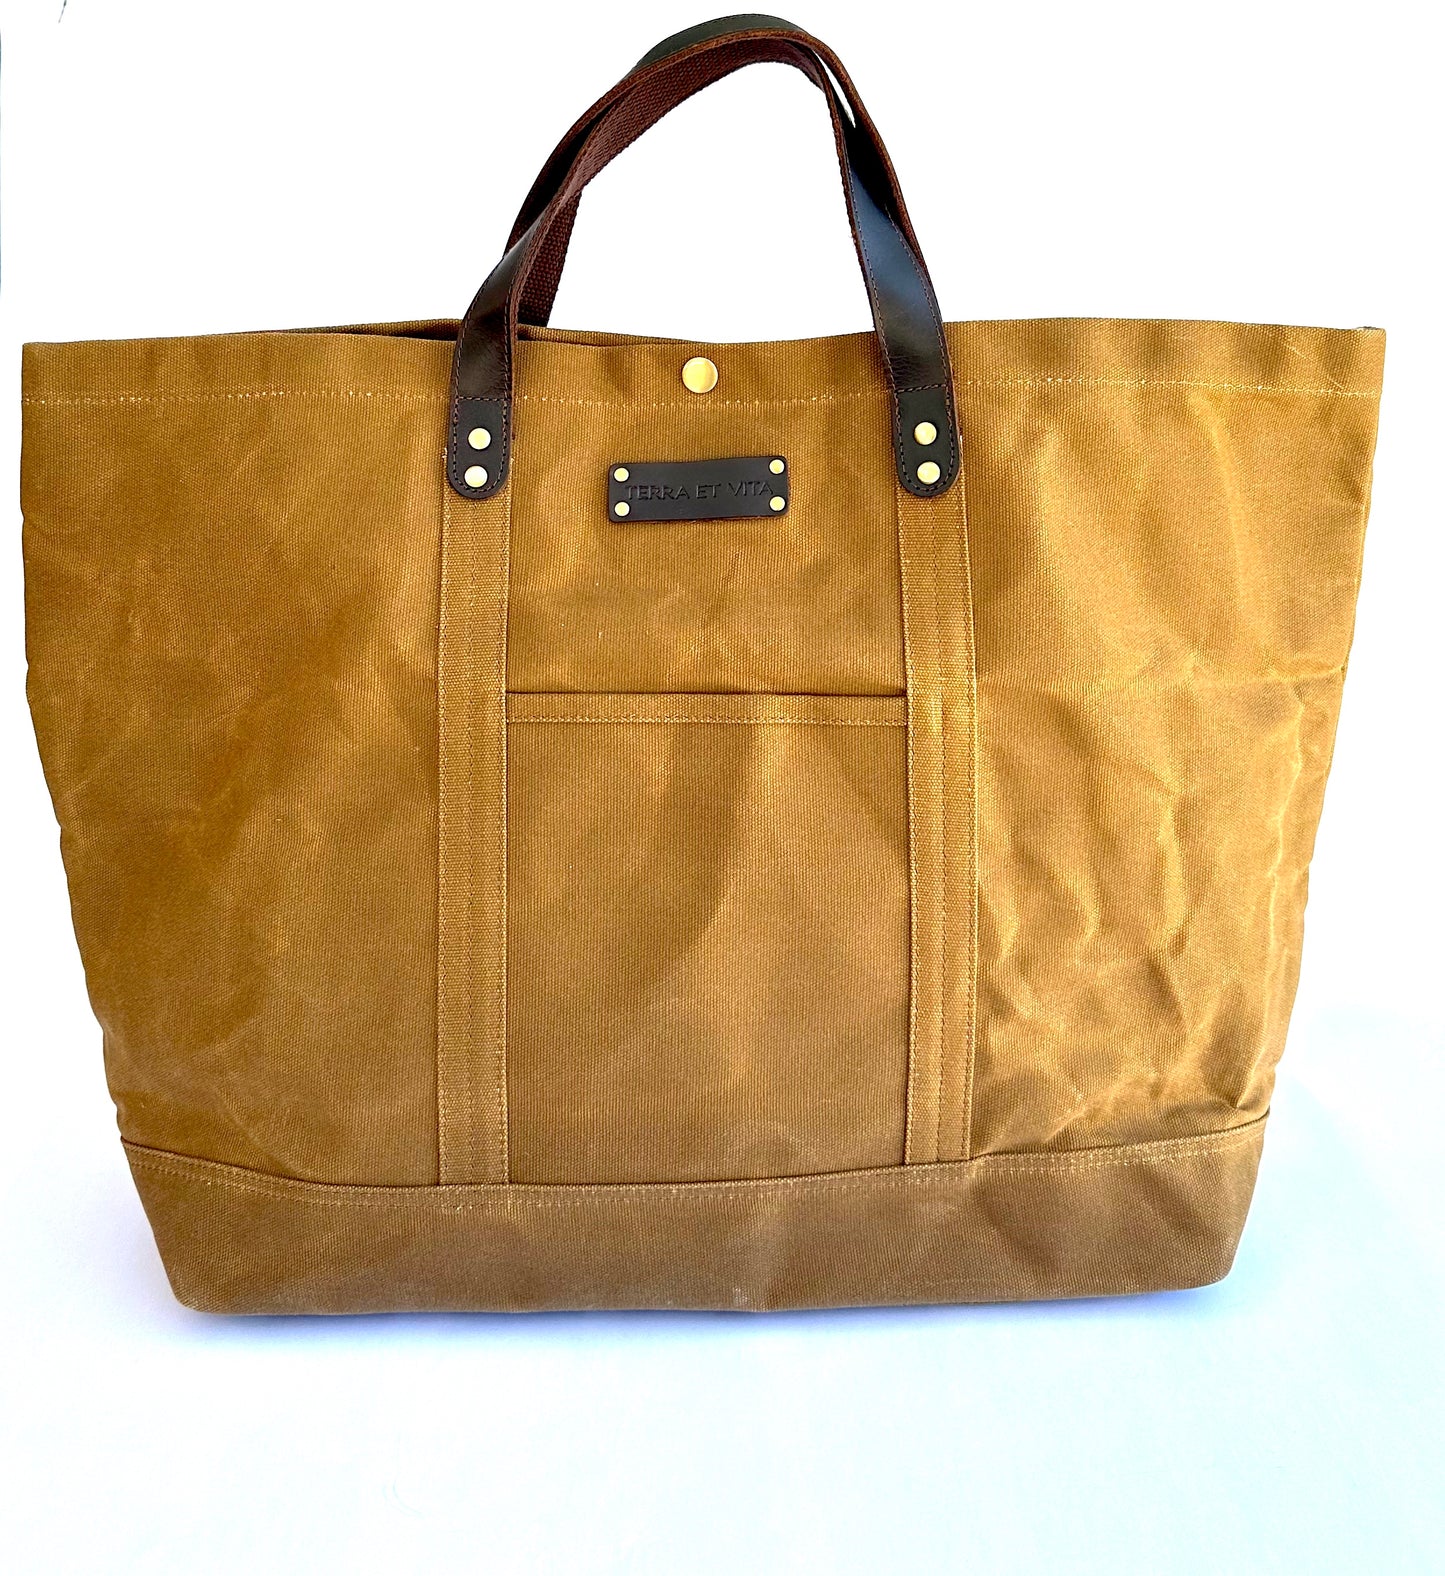 Canvas bag with leather handles